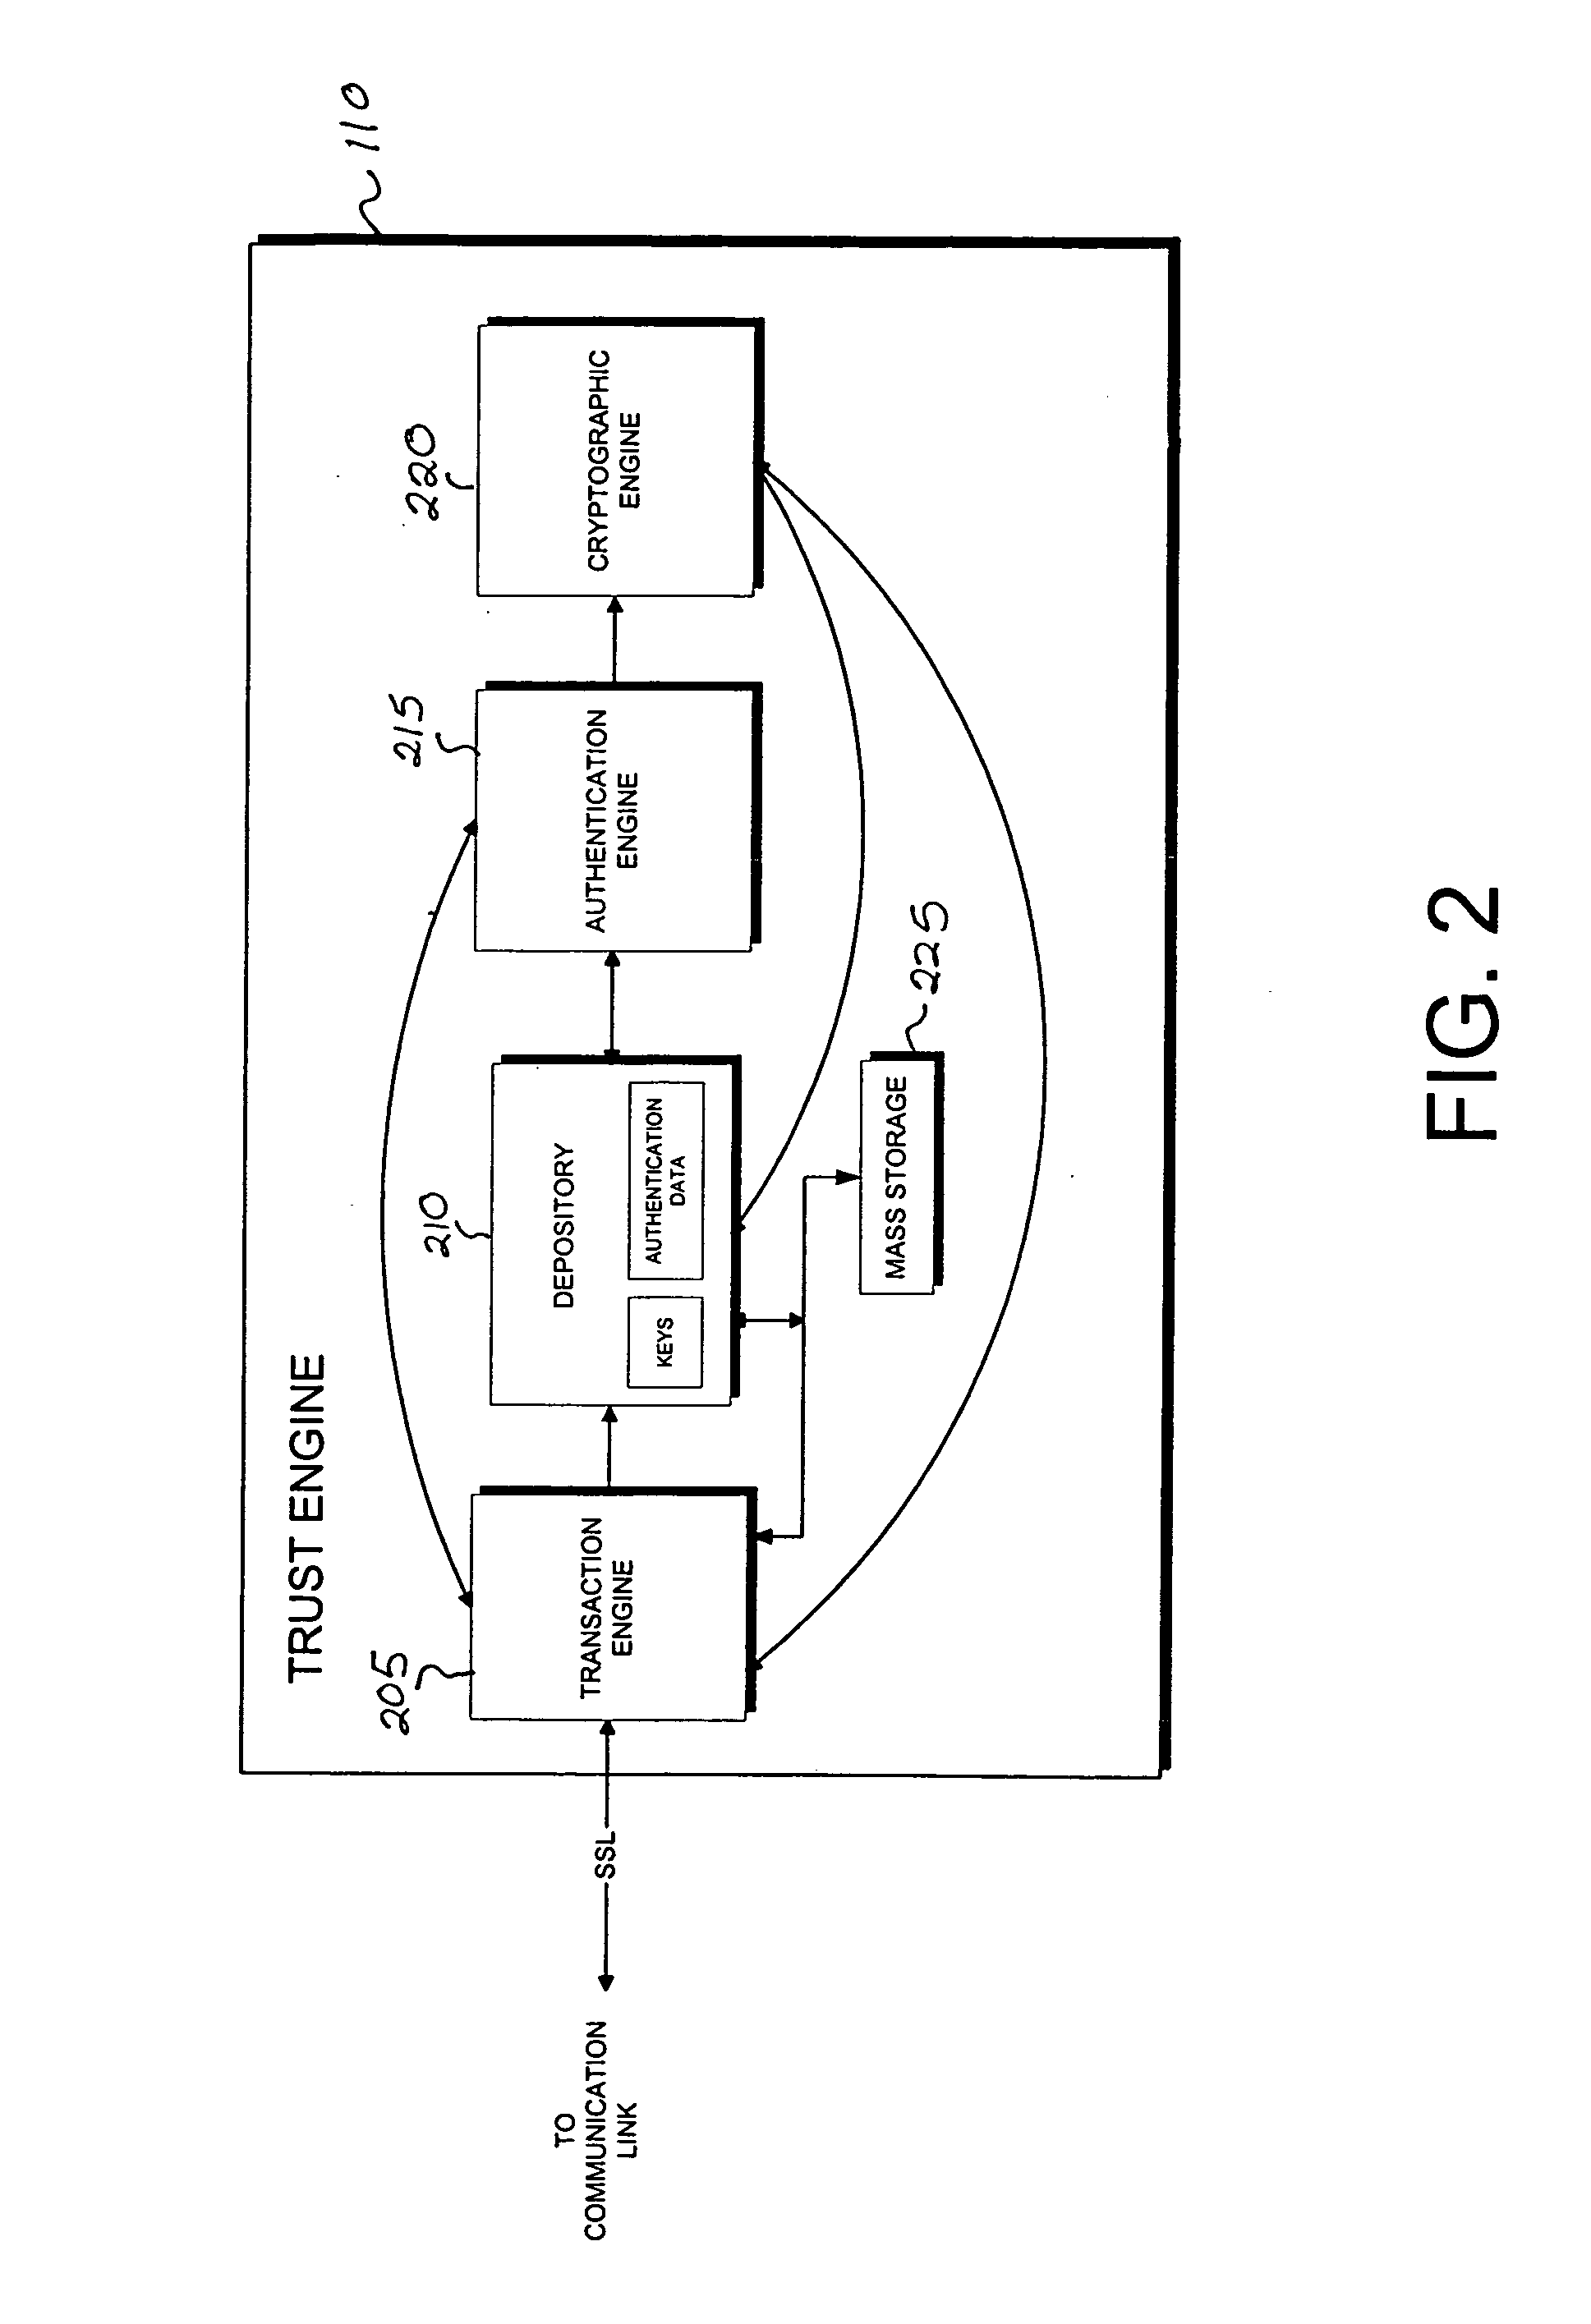 Context sensitive dynamic authentication in a cryptographic system